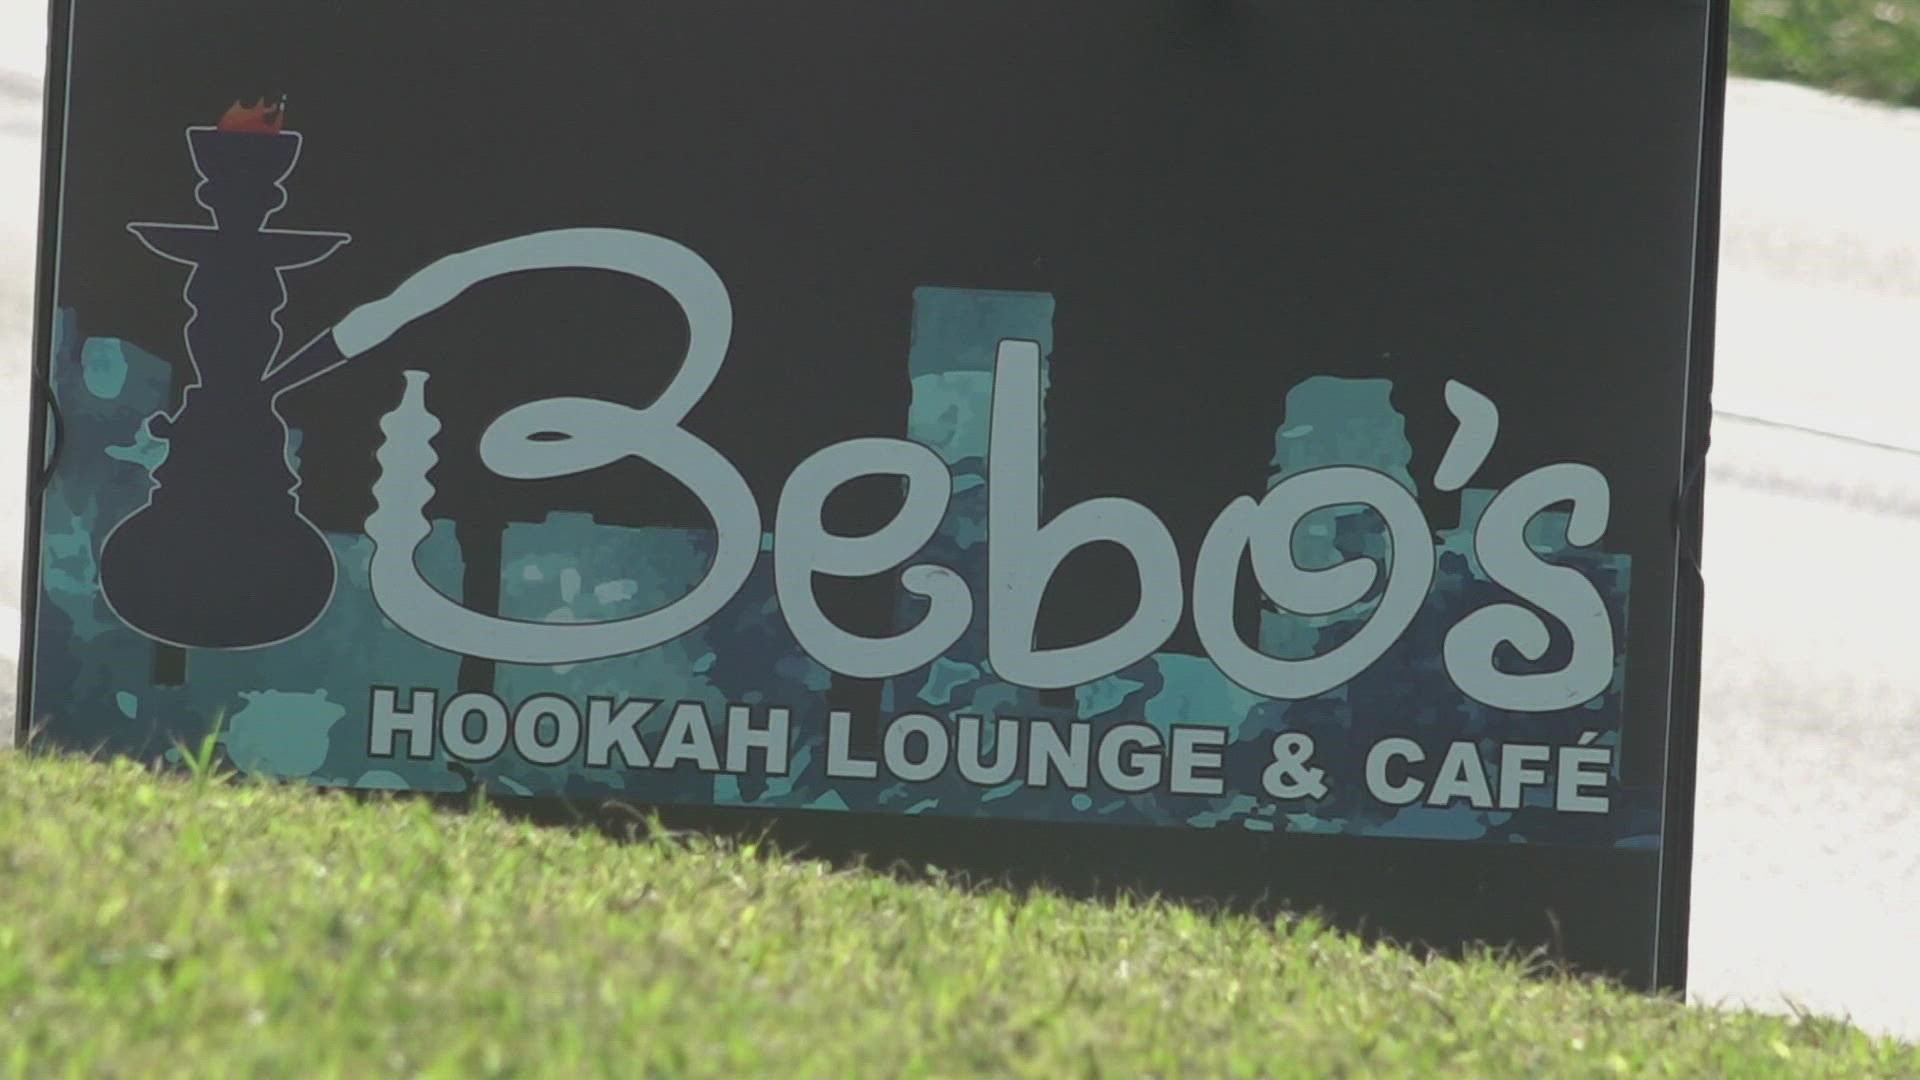 According to Knoxville Police, officers responded to a shooting call at Bebo's Café around 1:50 Sunday morning where they found two people shot in the parking lot.